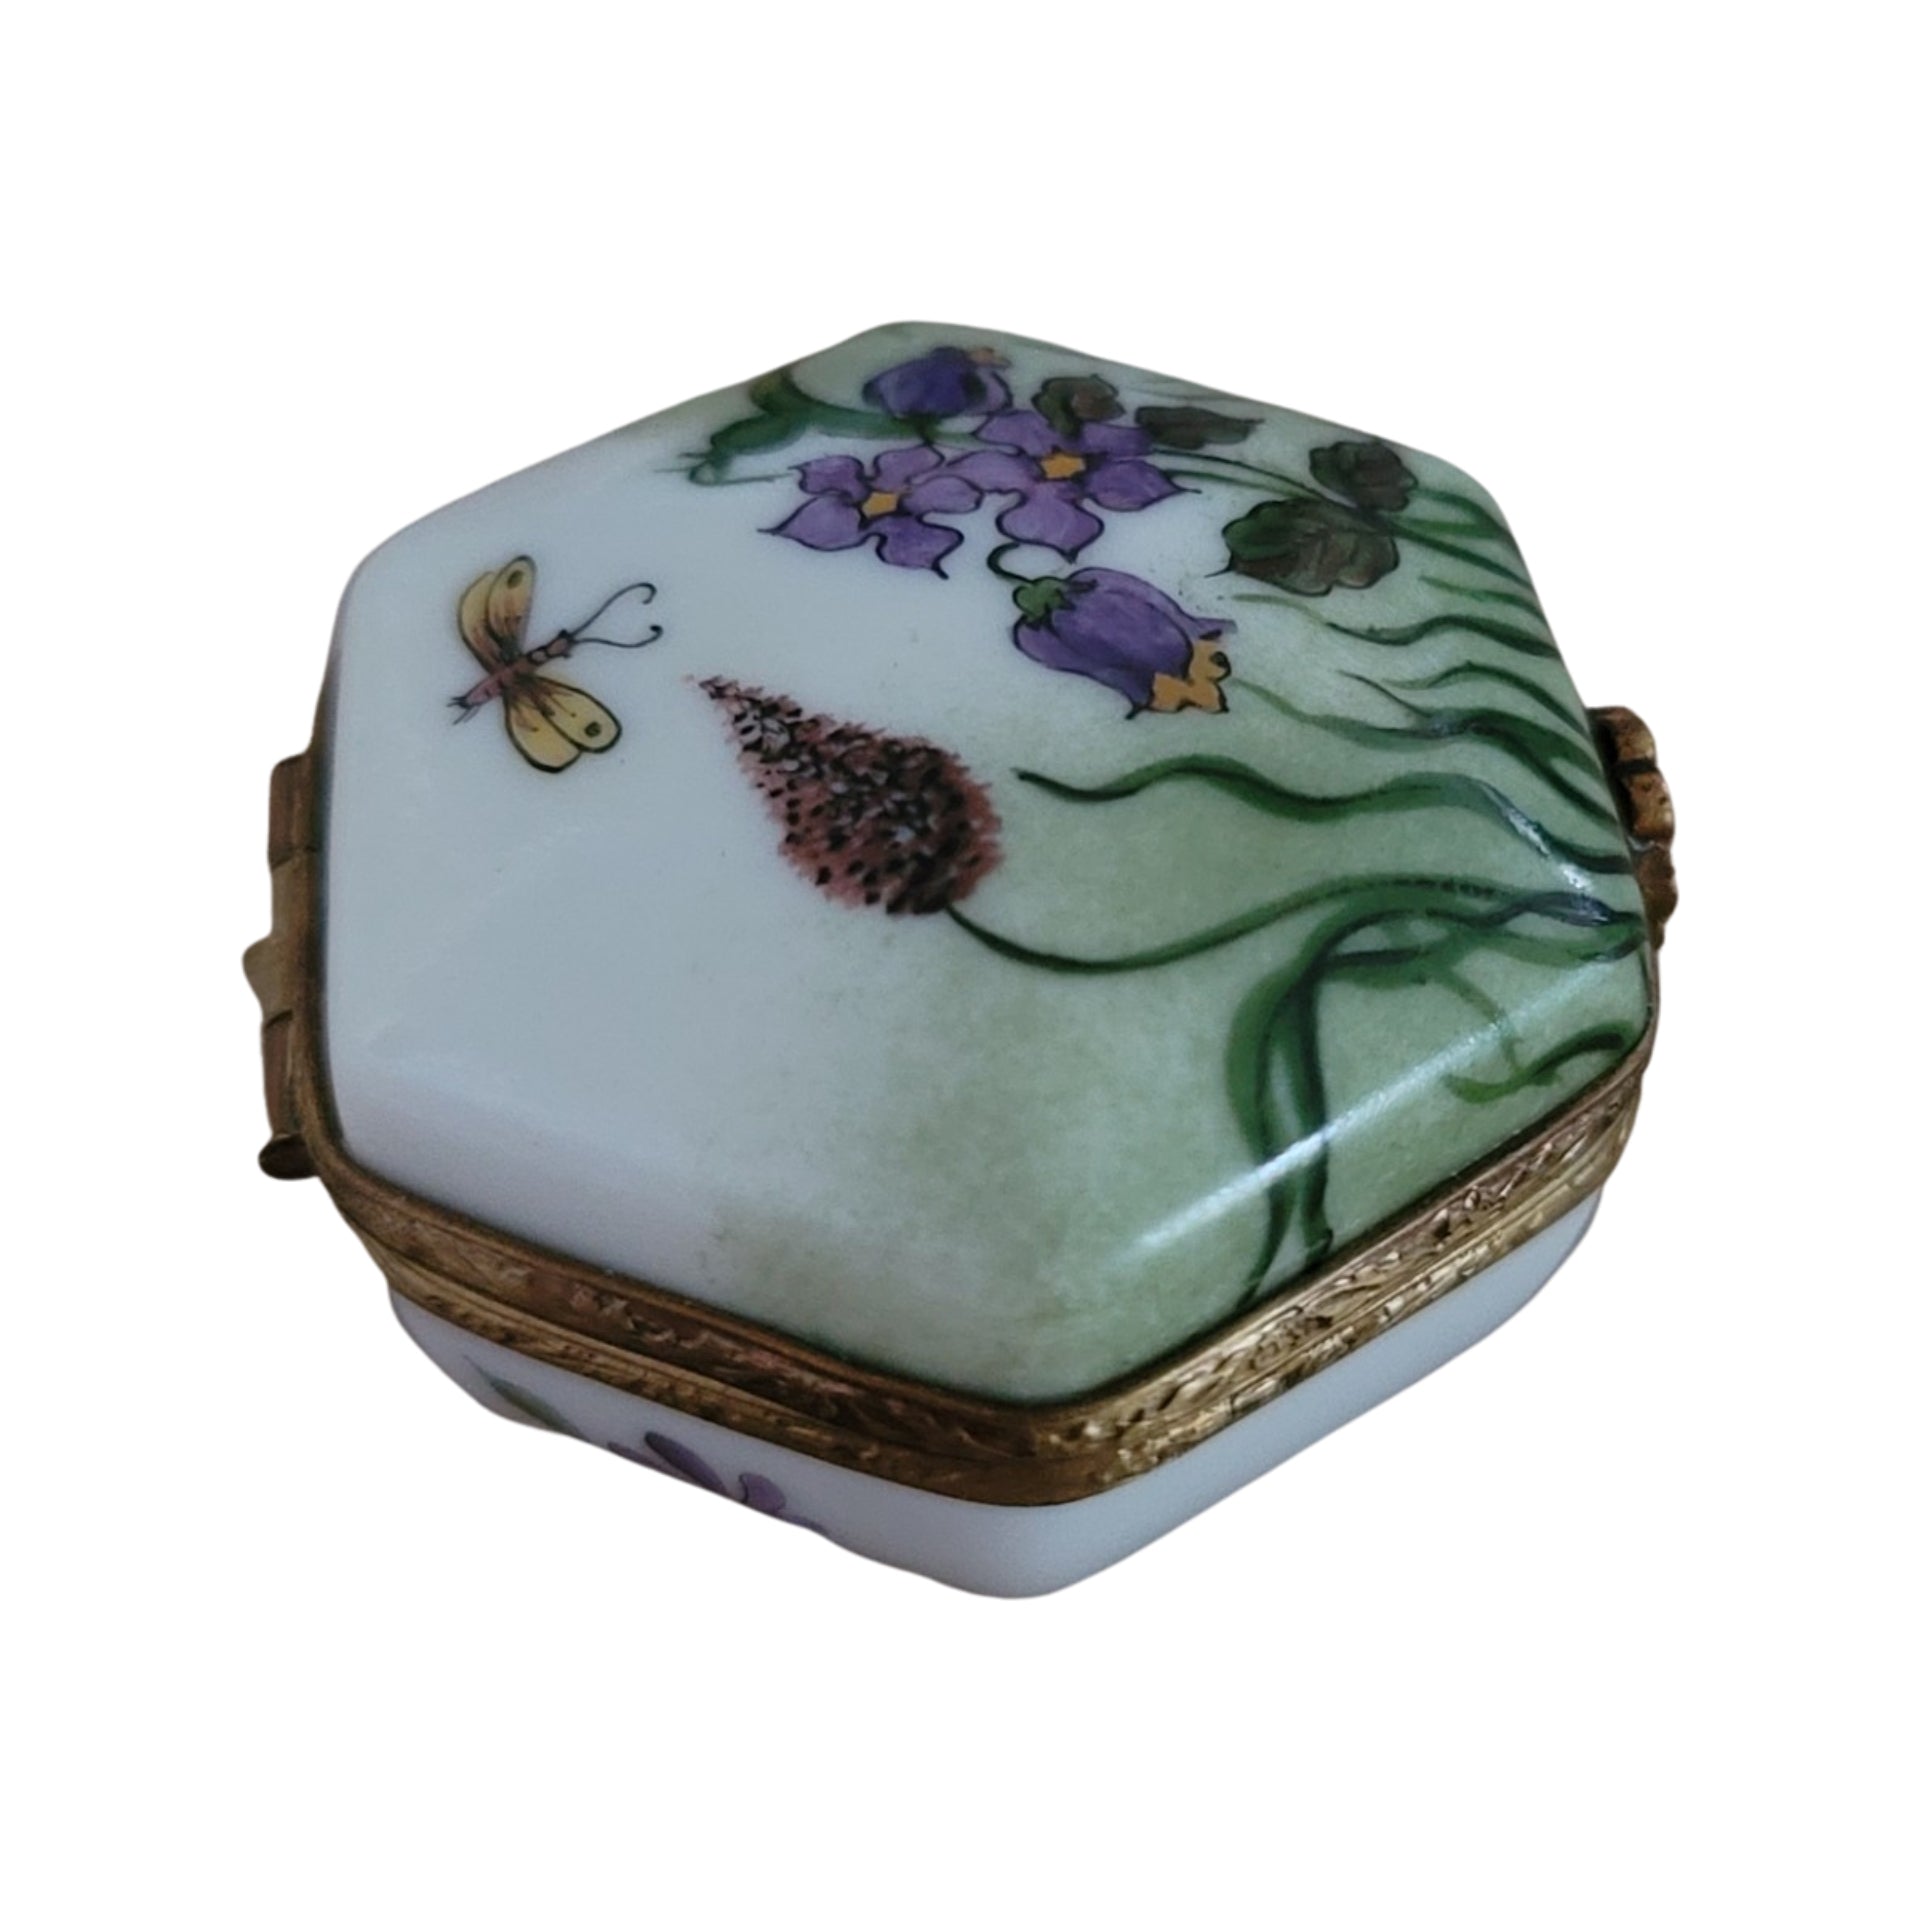  Authentic French Porcelain Hand Painted Limoges Box